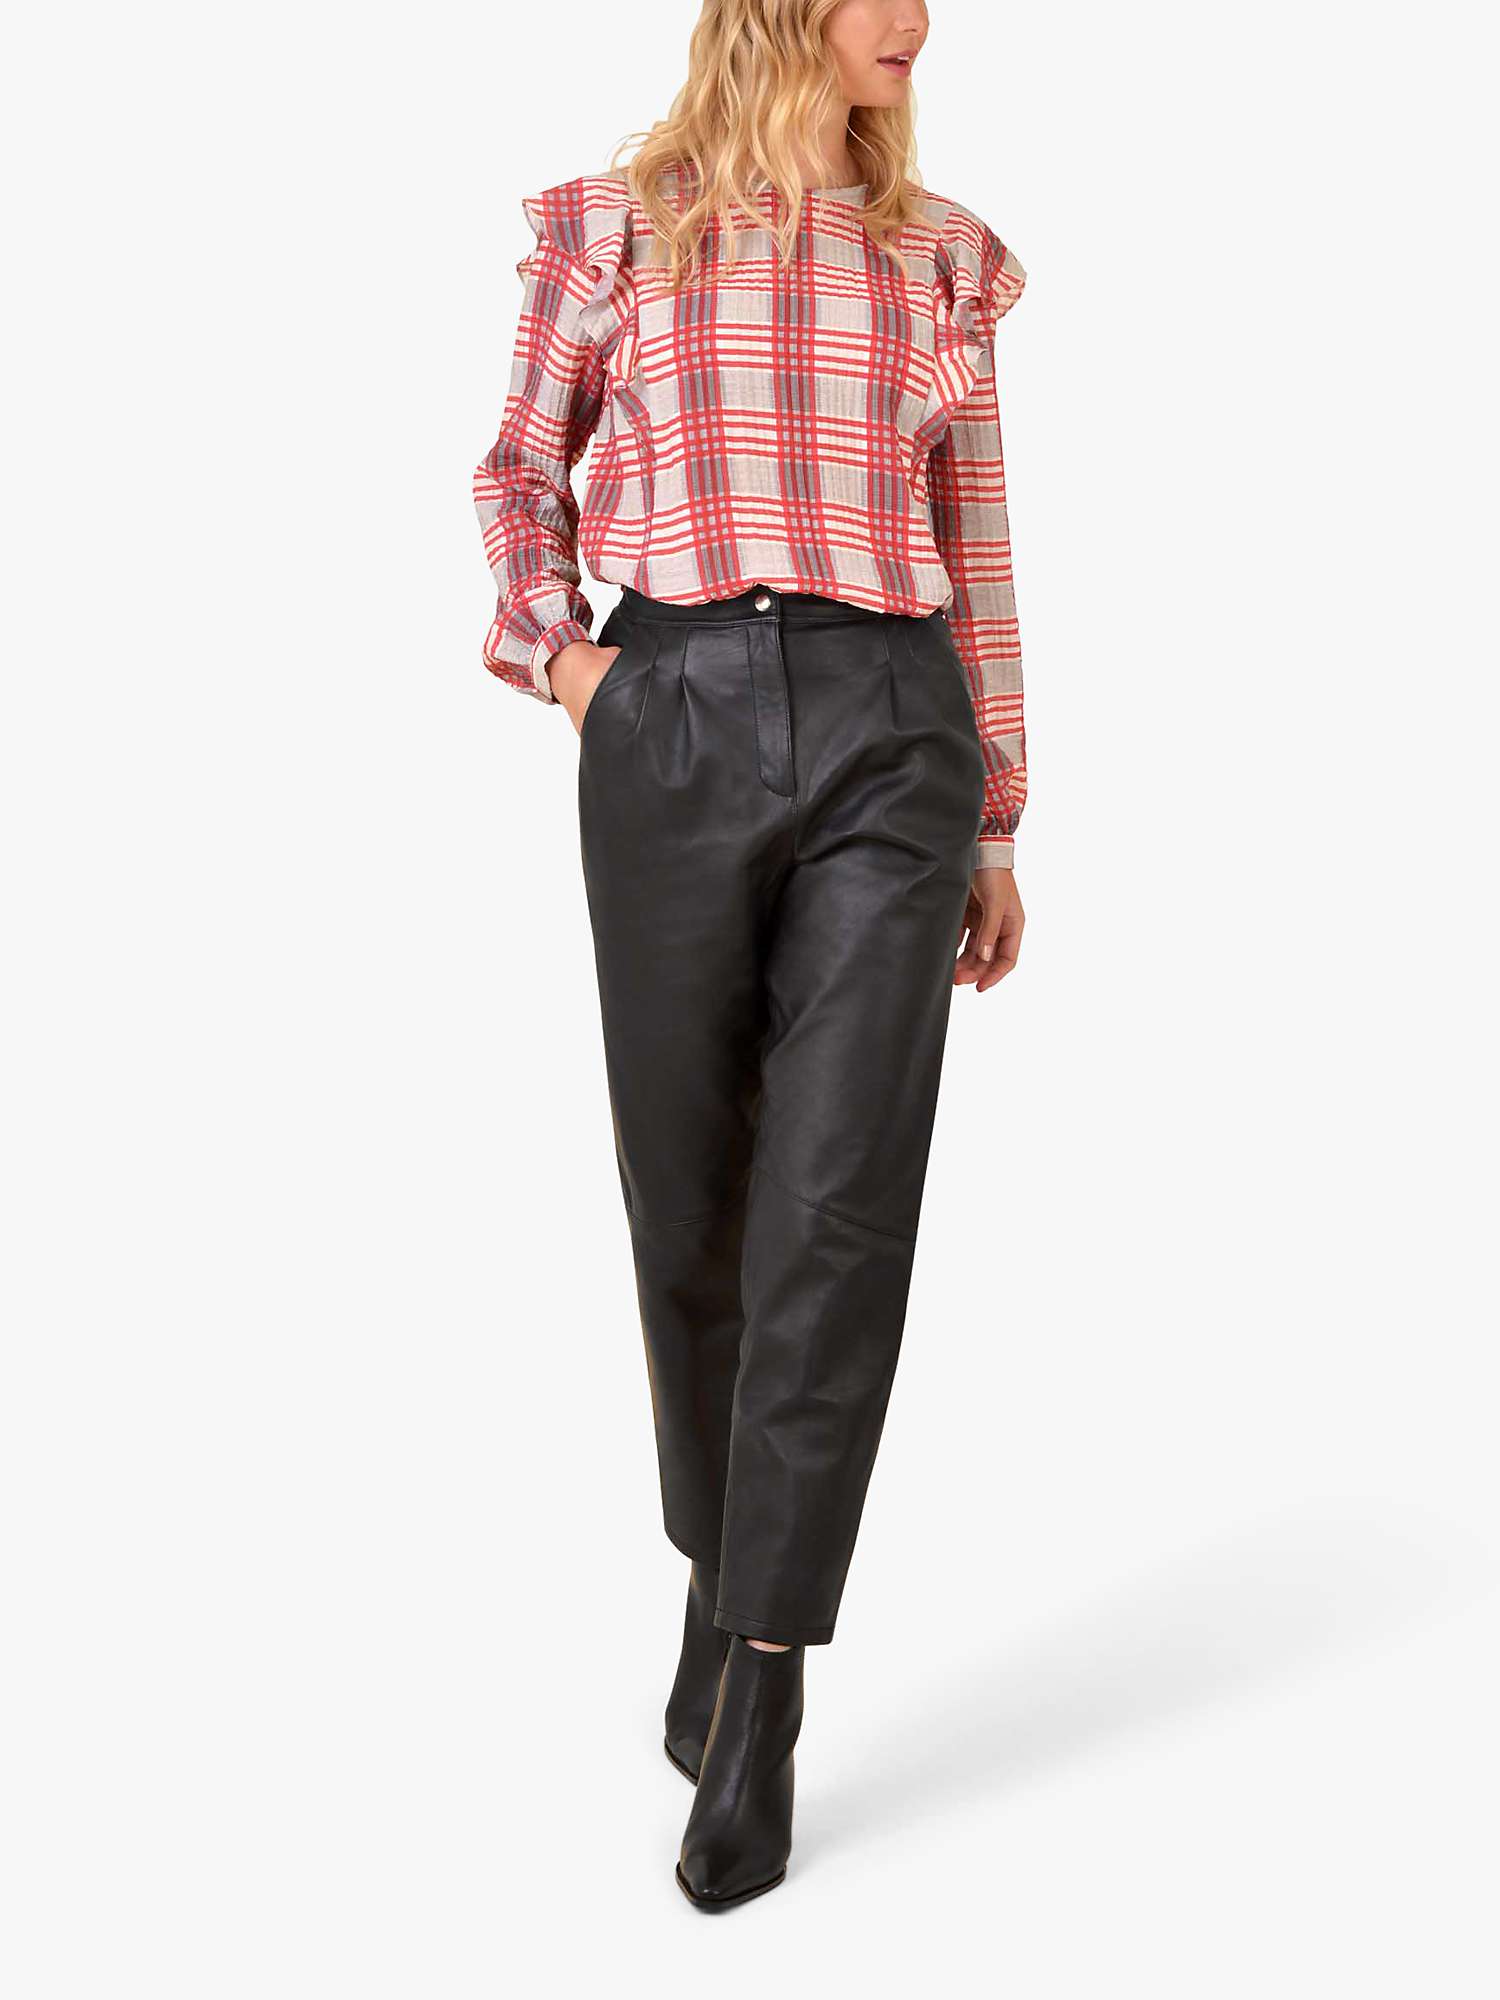 Buy Ro&Zo Check Textured Blouse, Red/Multi Online at johnlewis.com